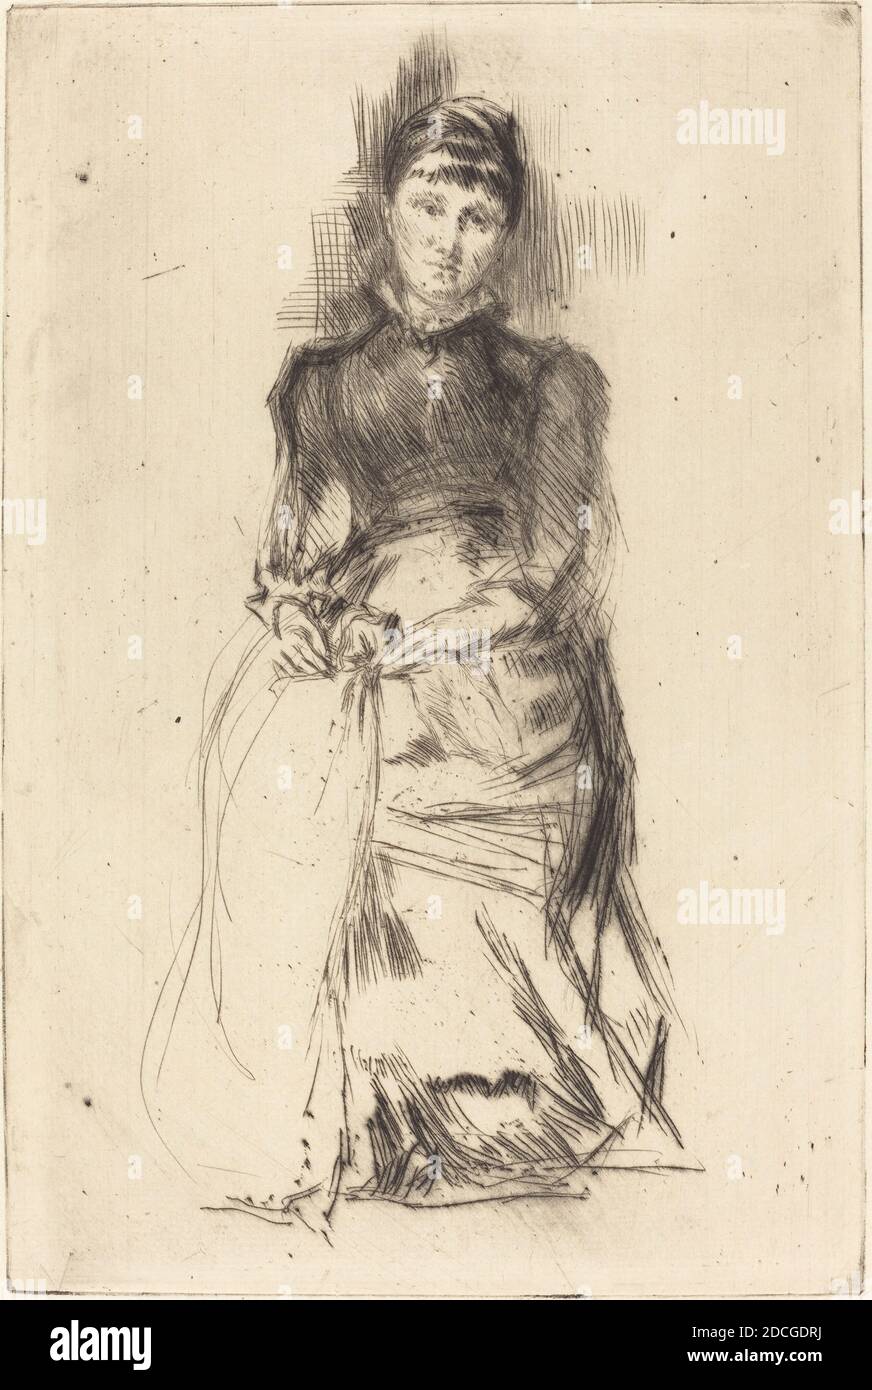 James McNeill Whistler, (artist), American, 1834 - 1903, Agnes, c. 1873/1875, drypoint Stock Photo